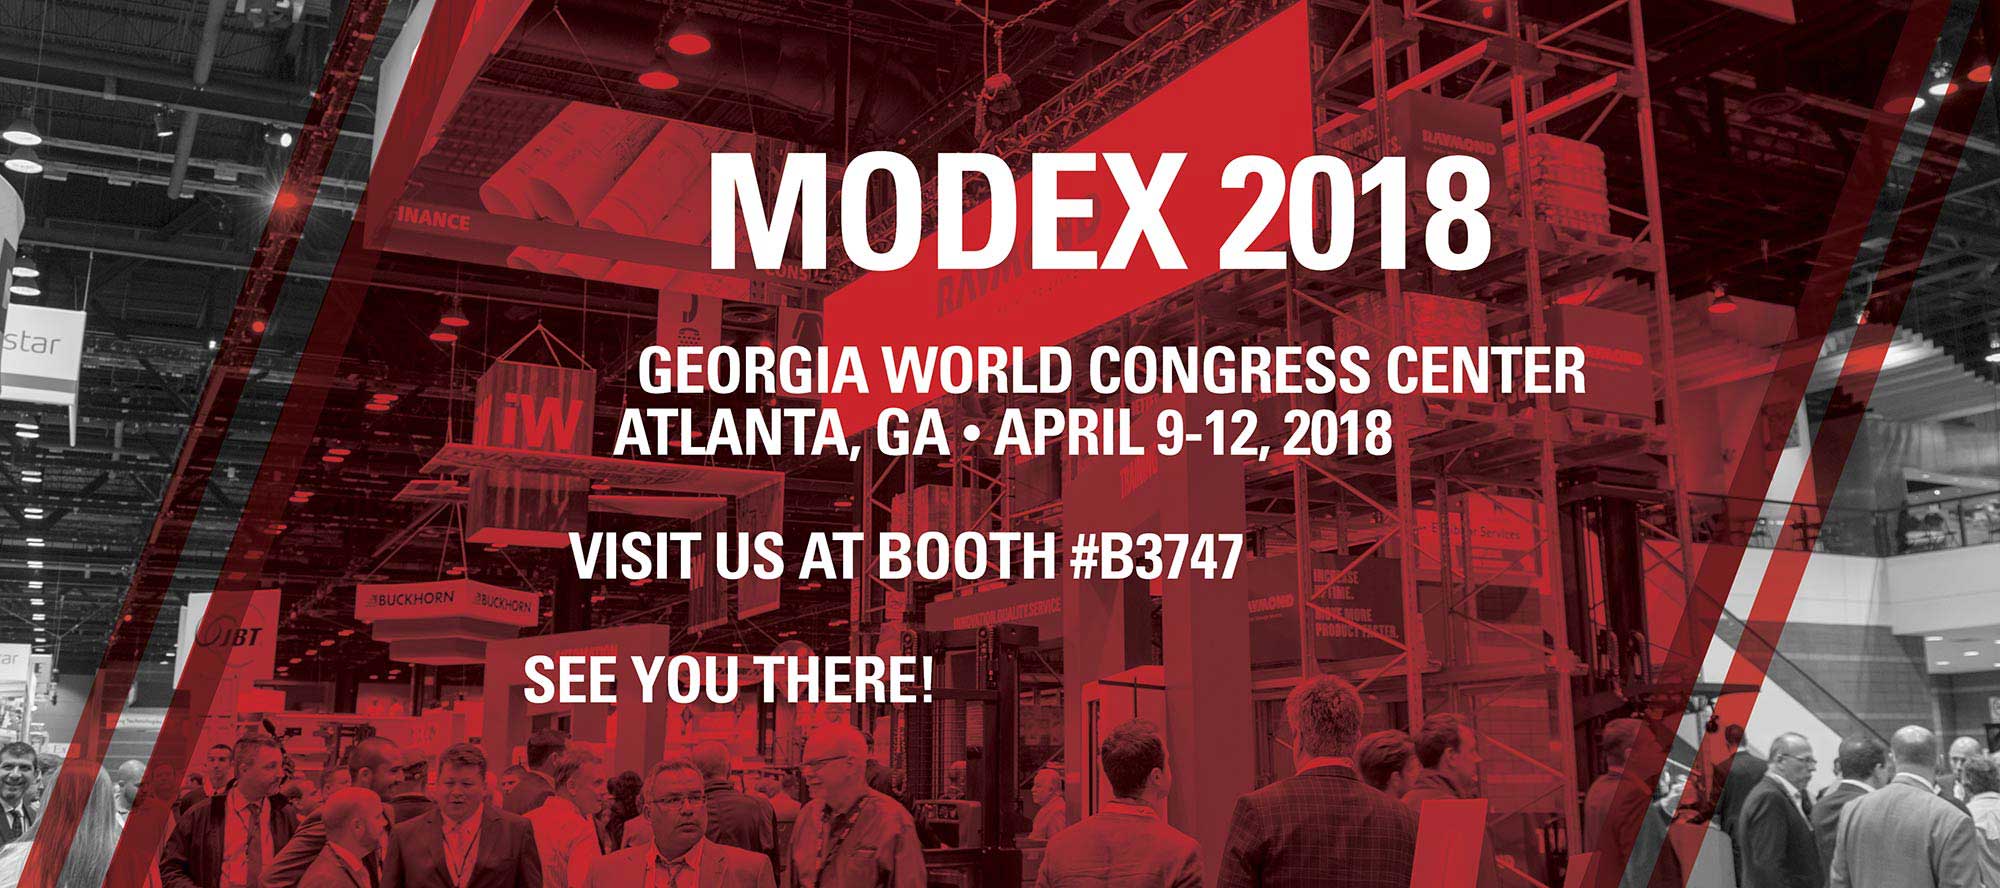 Visit the Raymond Corporation for MODEX 2018 at the Georgia World Congress Center in Atlanta, GA to be held April 9-12, 2018